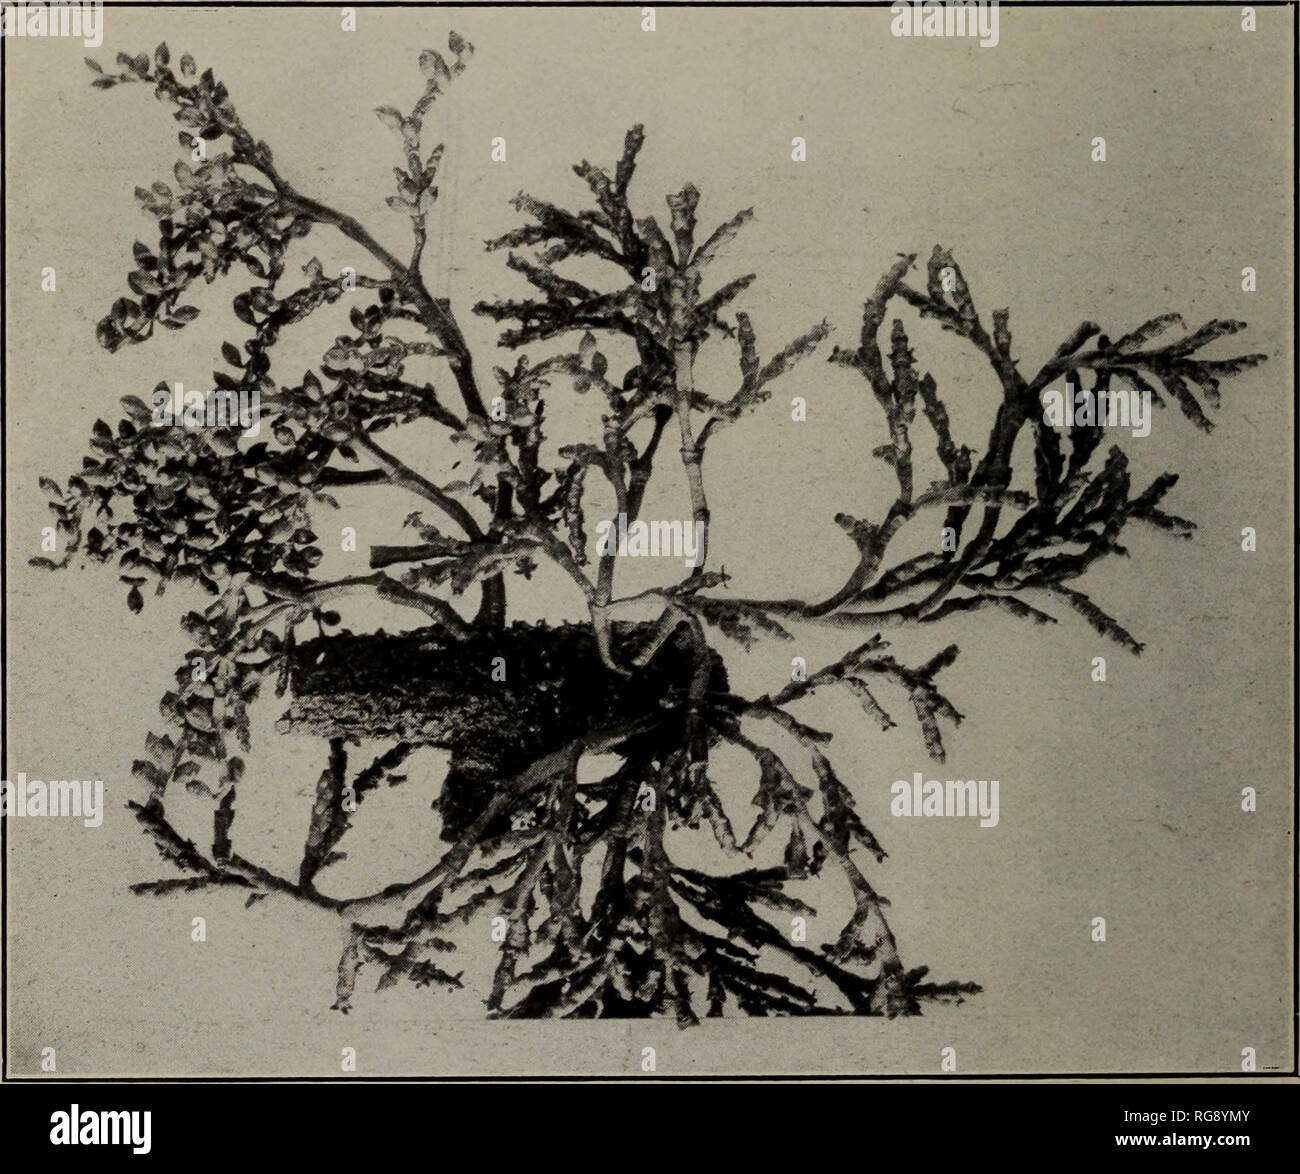 . [Bulletins on forest pathology : from Bulletin U.S.D.A., Washington, D.C., 1913-1925]. Trees; Plant diseases. Bui. 360, U. S. Dept. of Apiculture. Plate II. ?^Â¥ w mg^yg y$Ai â '*^3^n $r jn r H f5jH- |8| JBH^n Fig. 1.âRazoumofskya douqlasii on Pseudotsuga taxifolia. Staminate plants, slightly less than natural size.. Fig. 2.âRazoumofskya campylopoda on Pinus ponderosa. The staminate and pistillate plants are growing close together on the same branch, a very- common condition lor all species, but not generally known.. Please note that these images are extracted from scanned page images that m Stock Photo